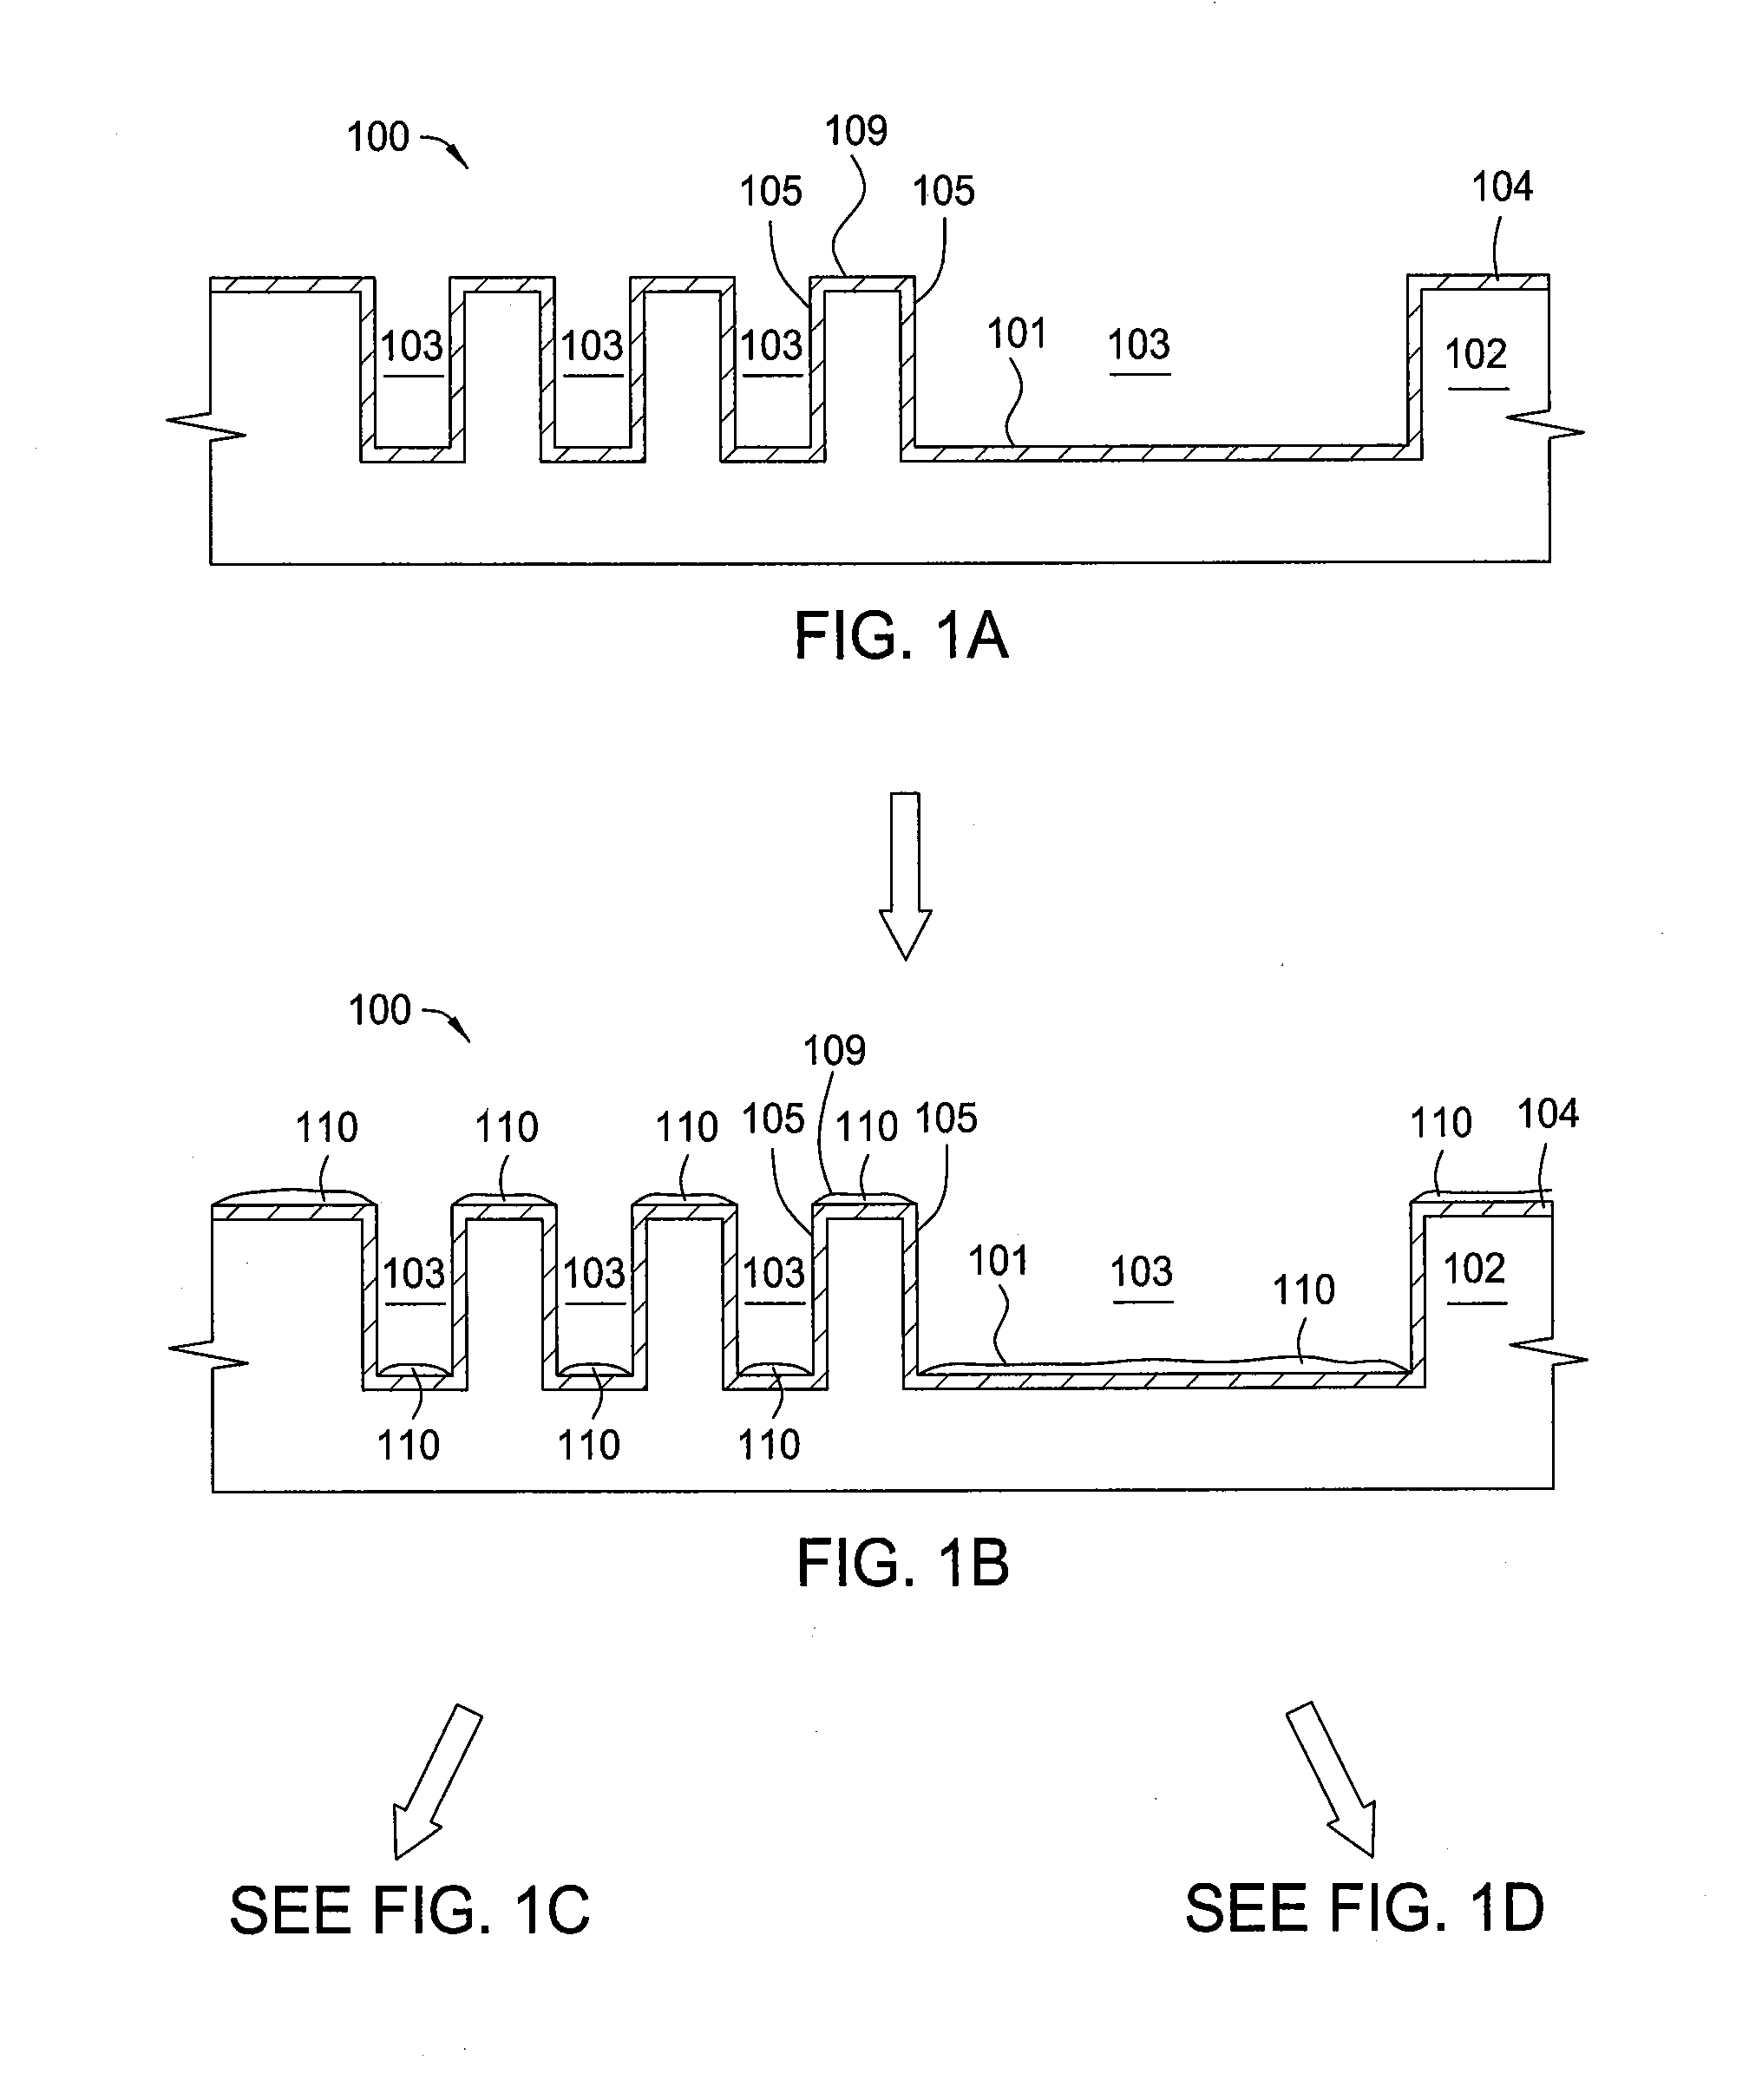 Process for electroless copper deposition on a ruthenium seed